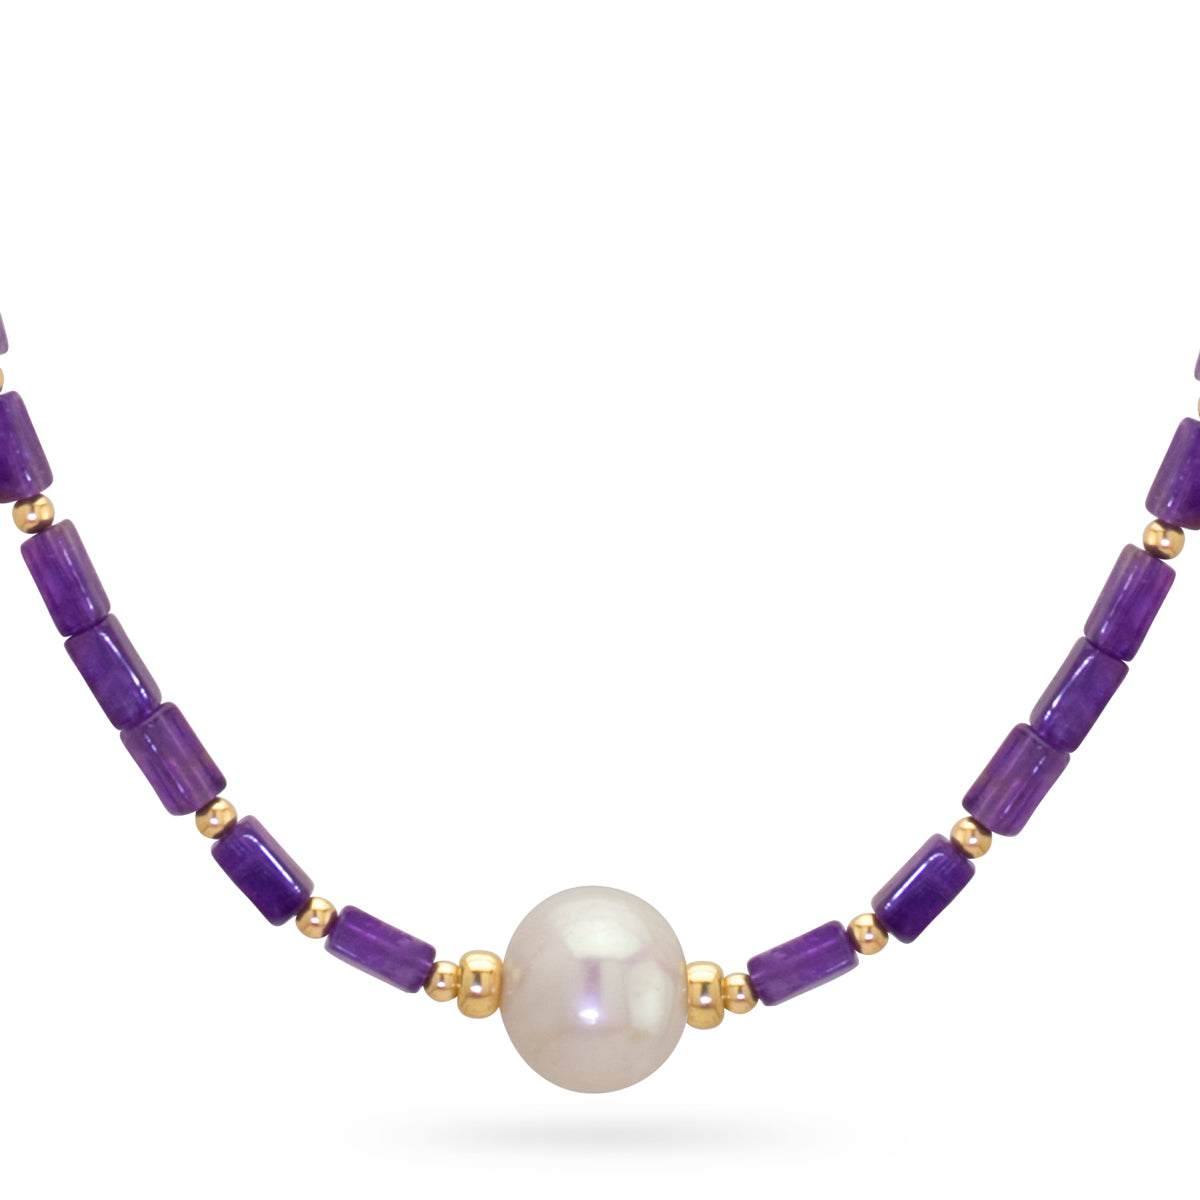 Impressionist Collection Amethyst & Pearl Necklace - 2